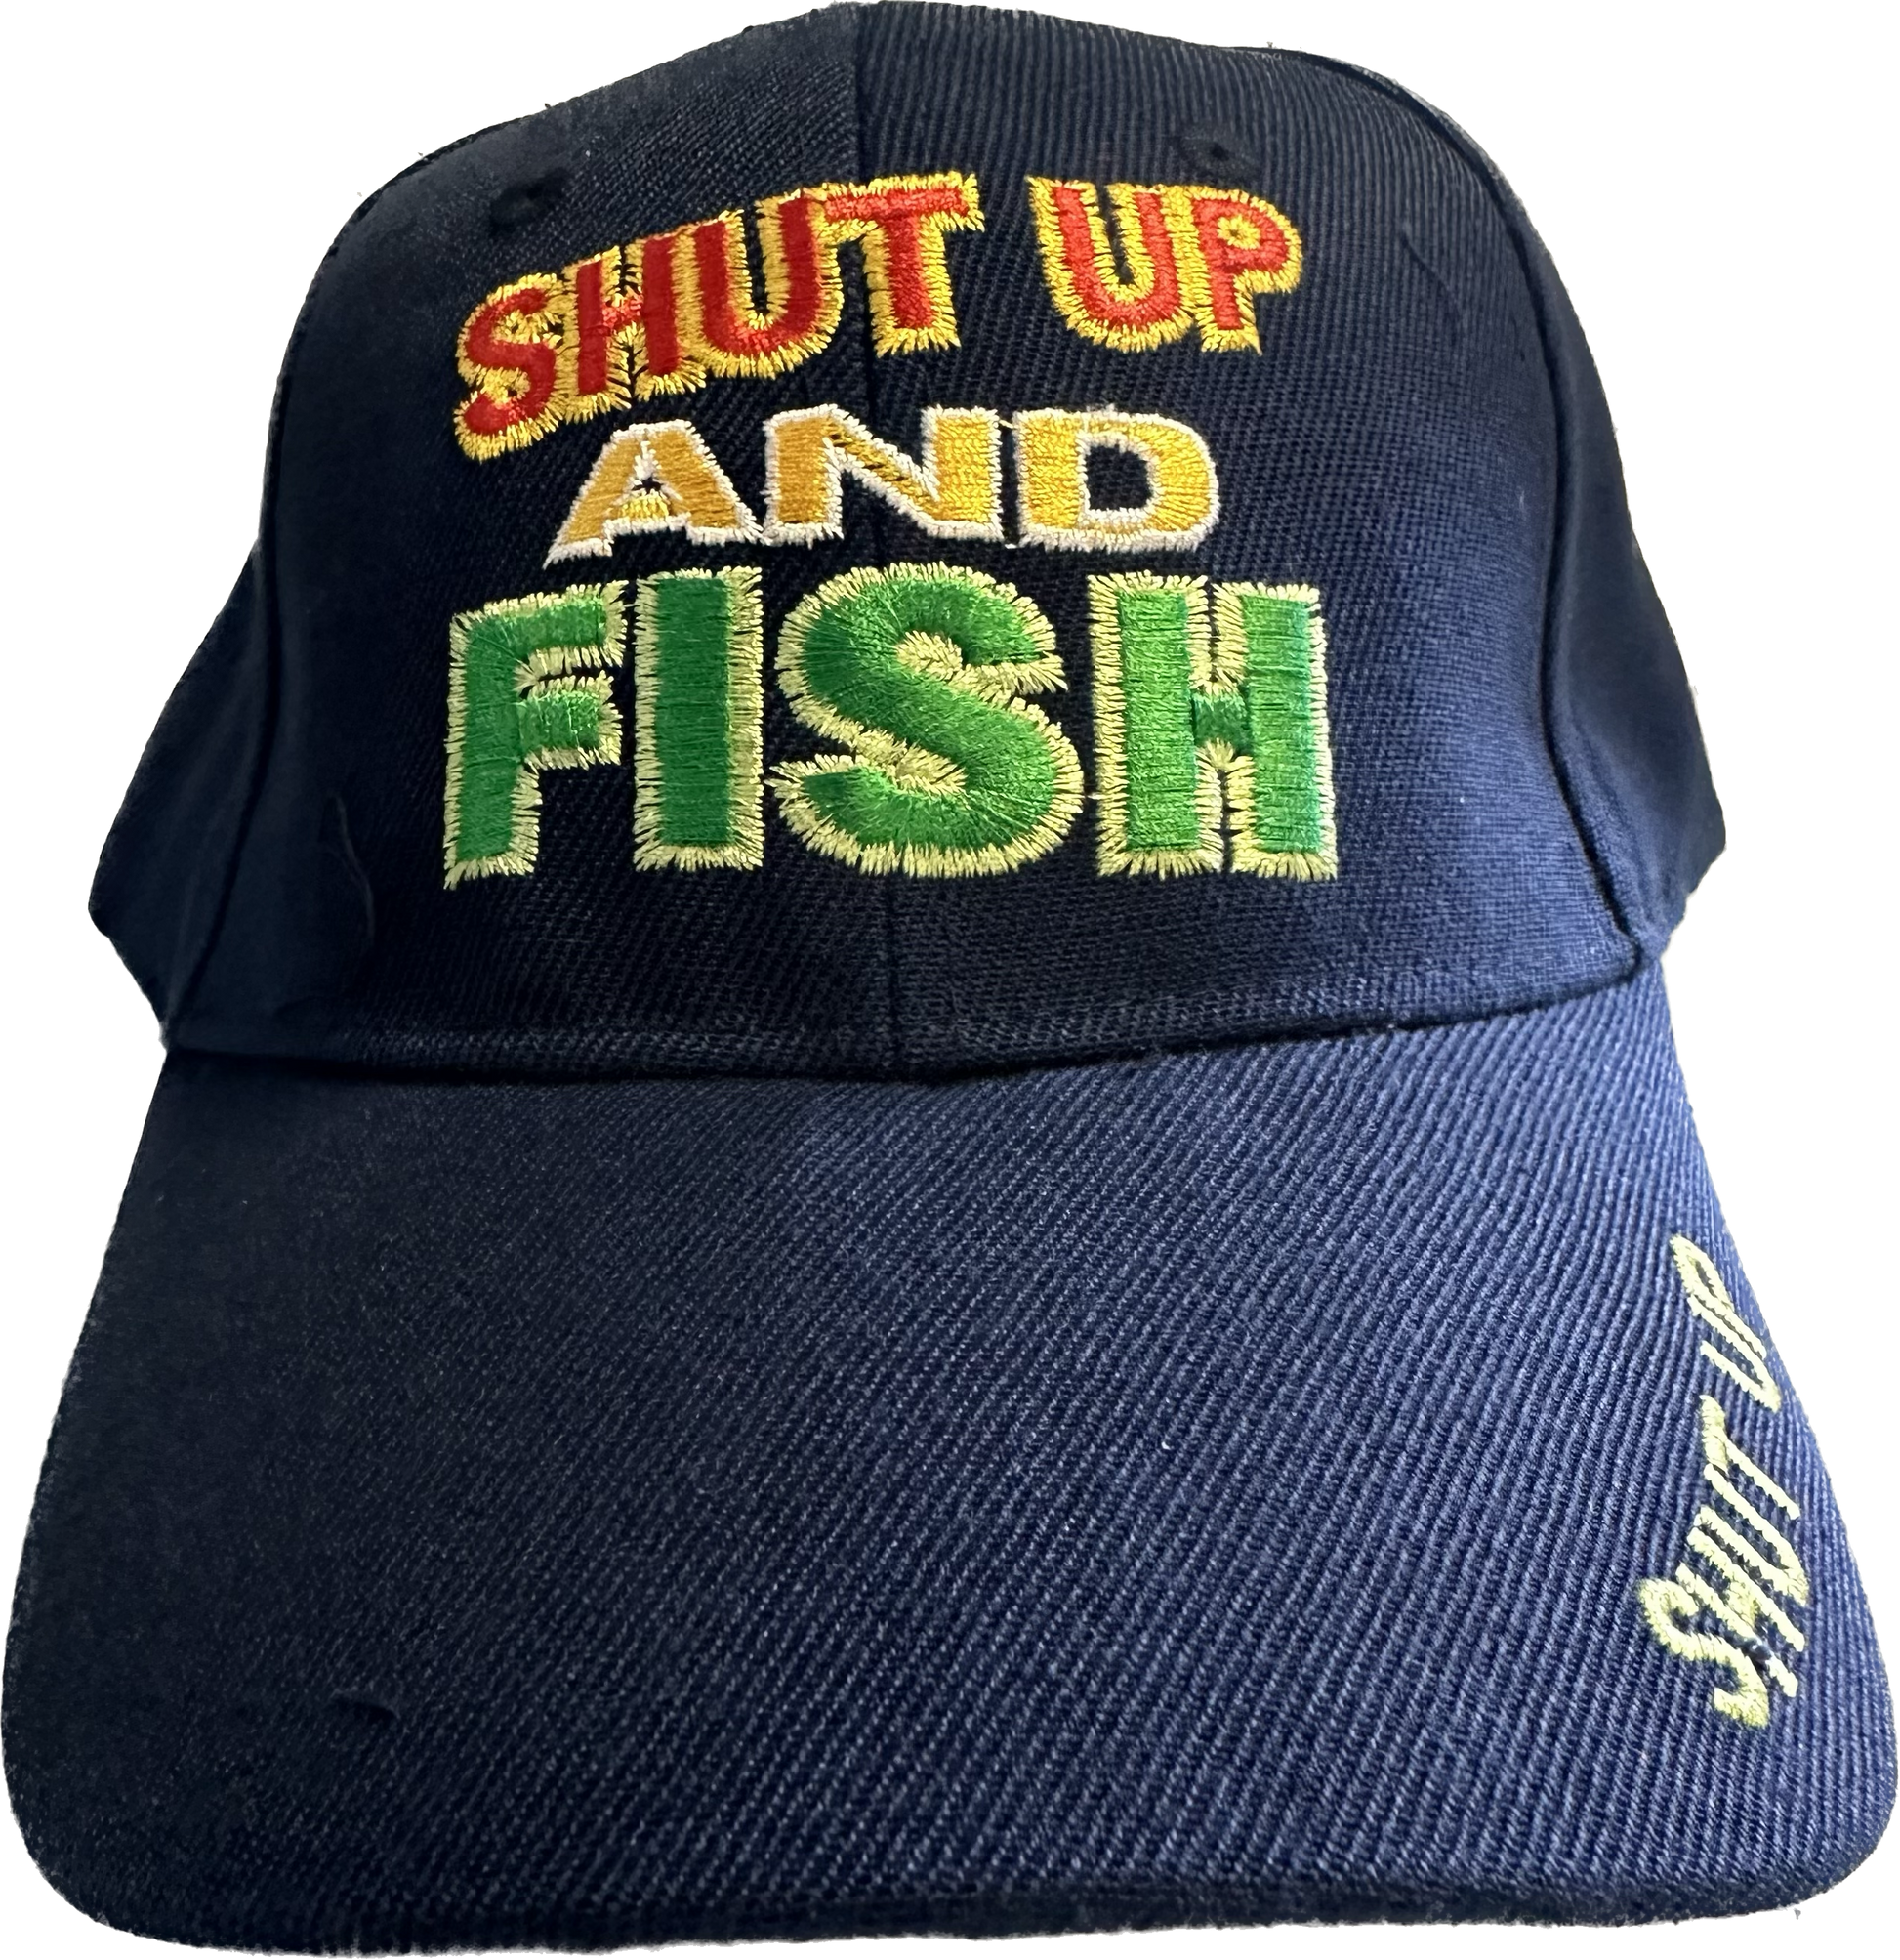 Blue Shut Up And Fish Hat